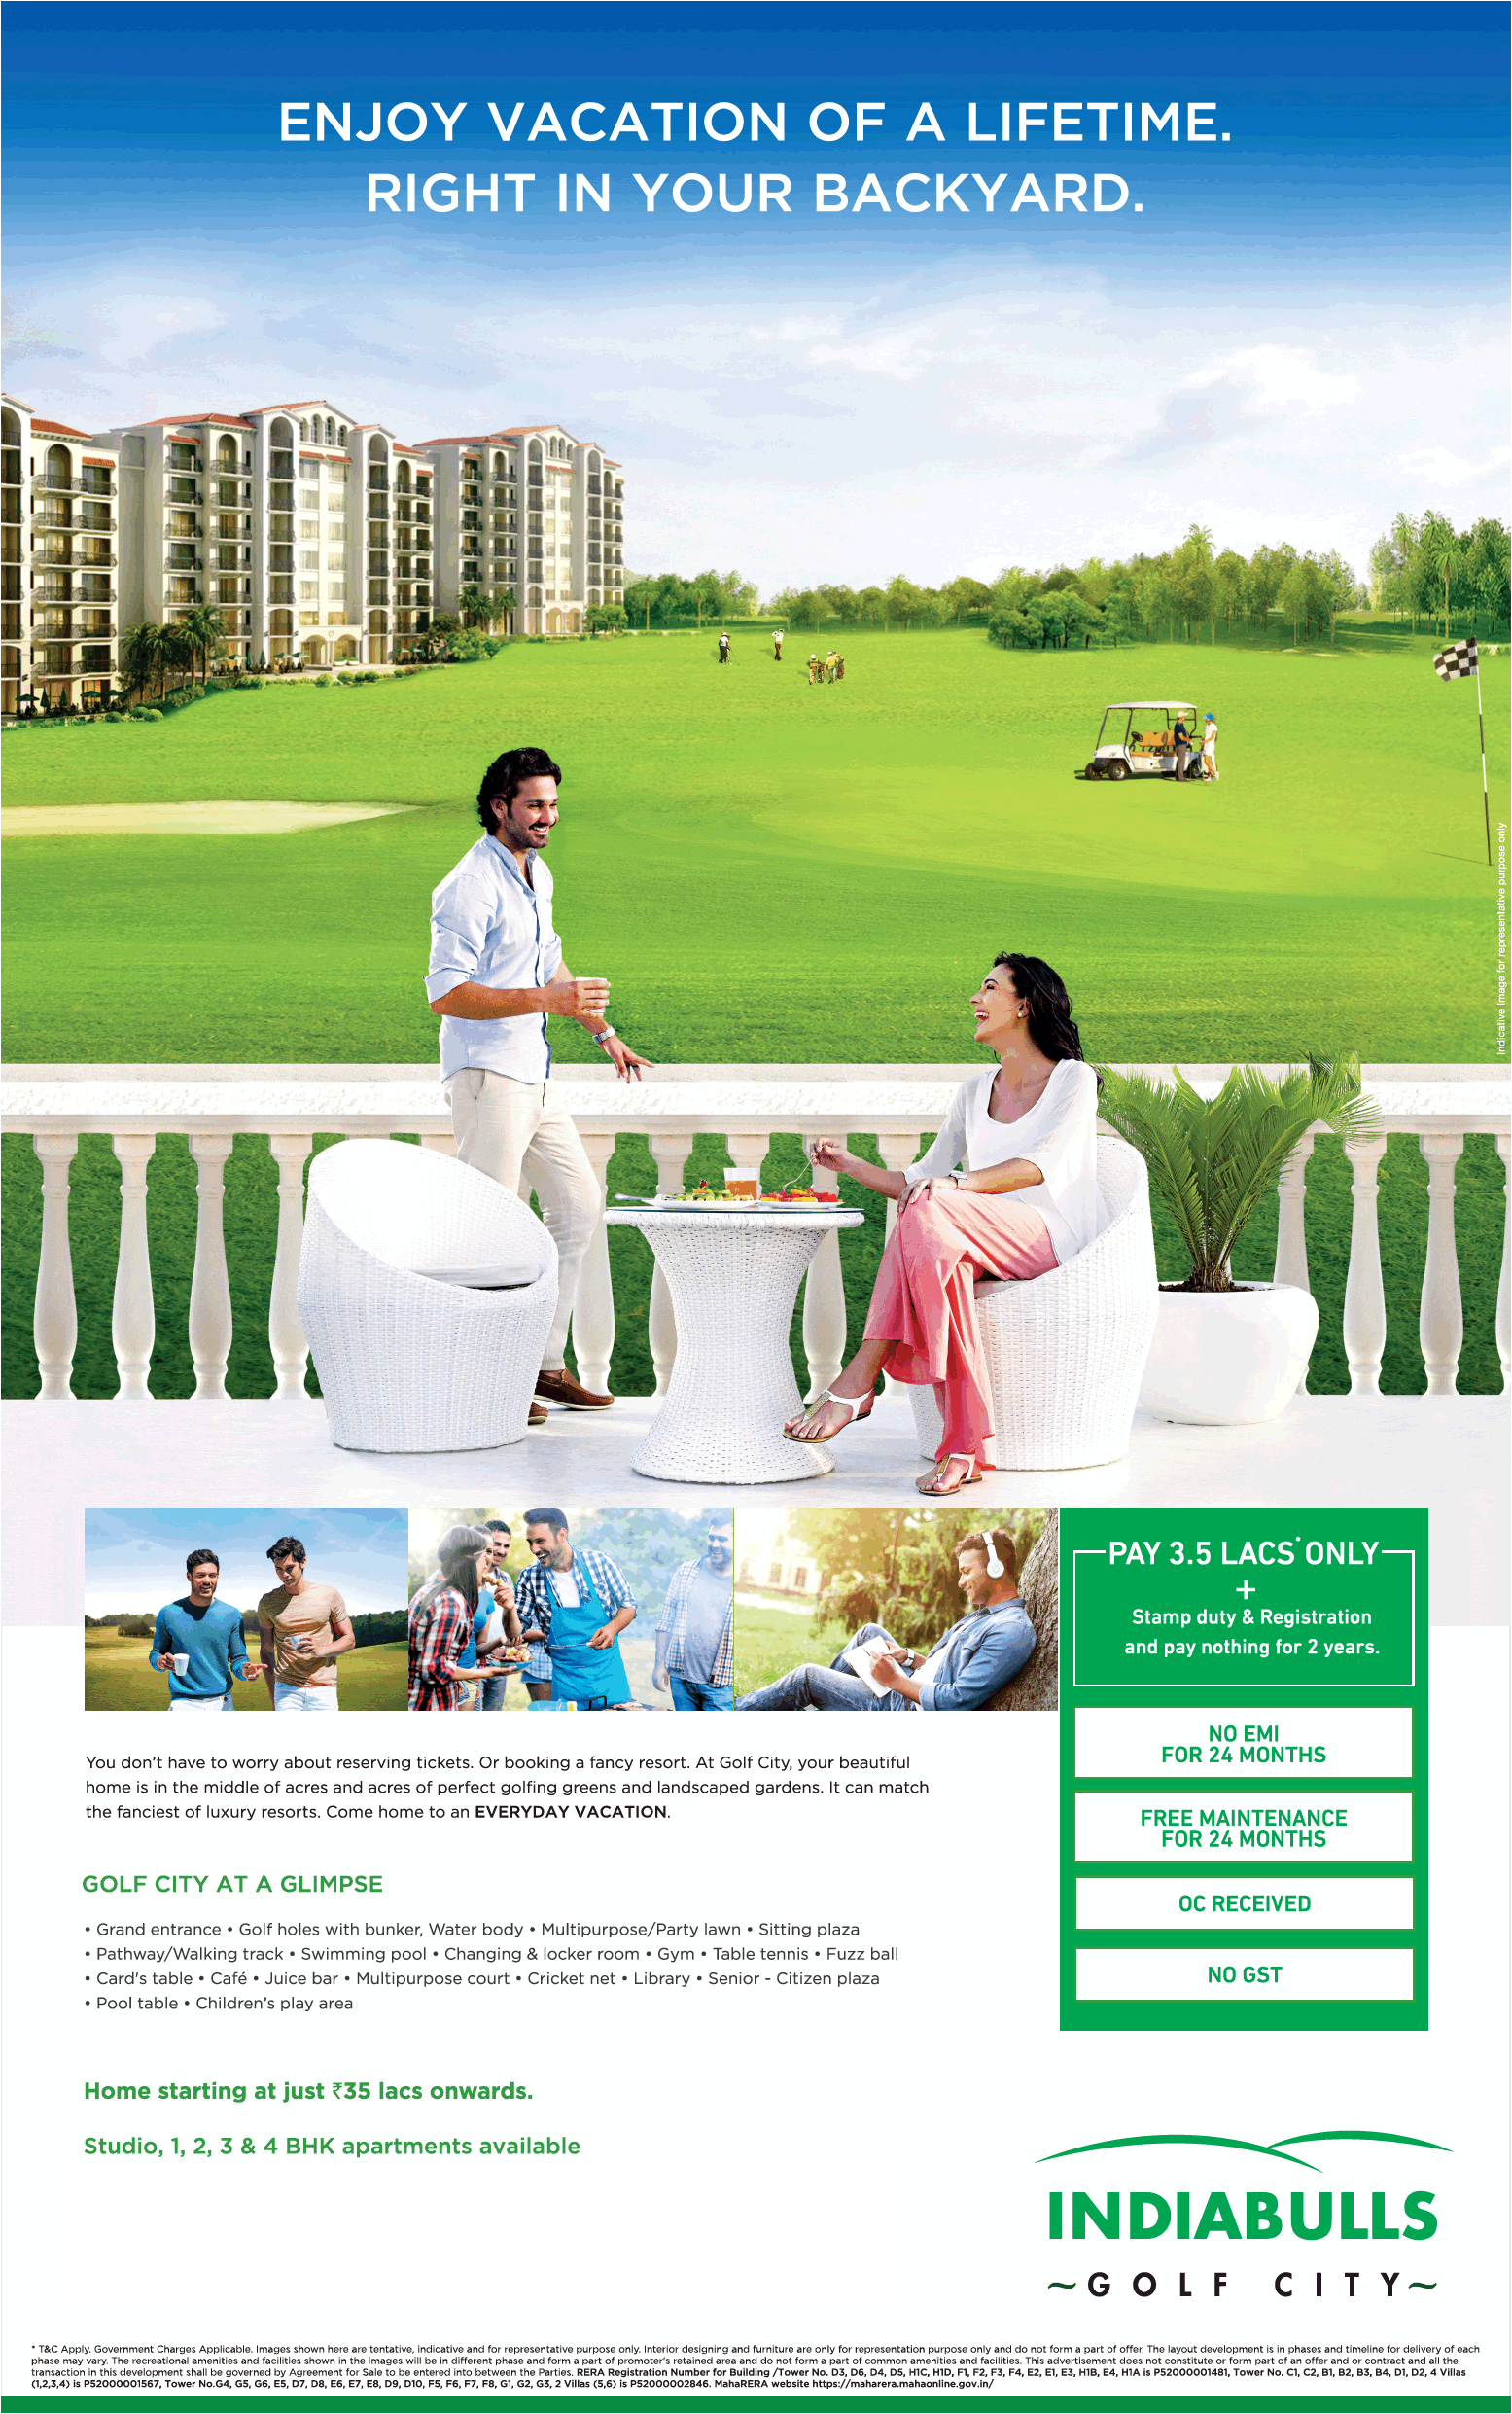 Pay Rs. 3.5 lakhs only at Indiabulls Golf City in Navi Mumbai Update